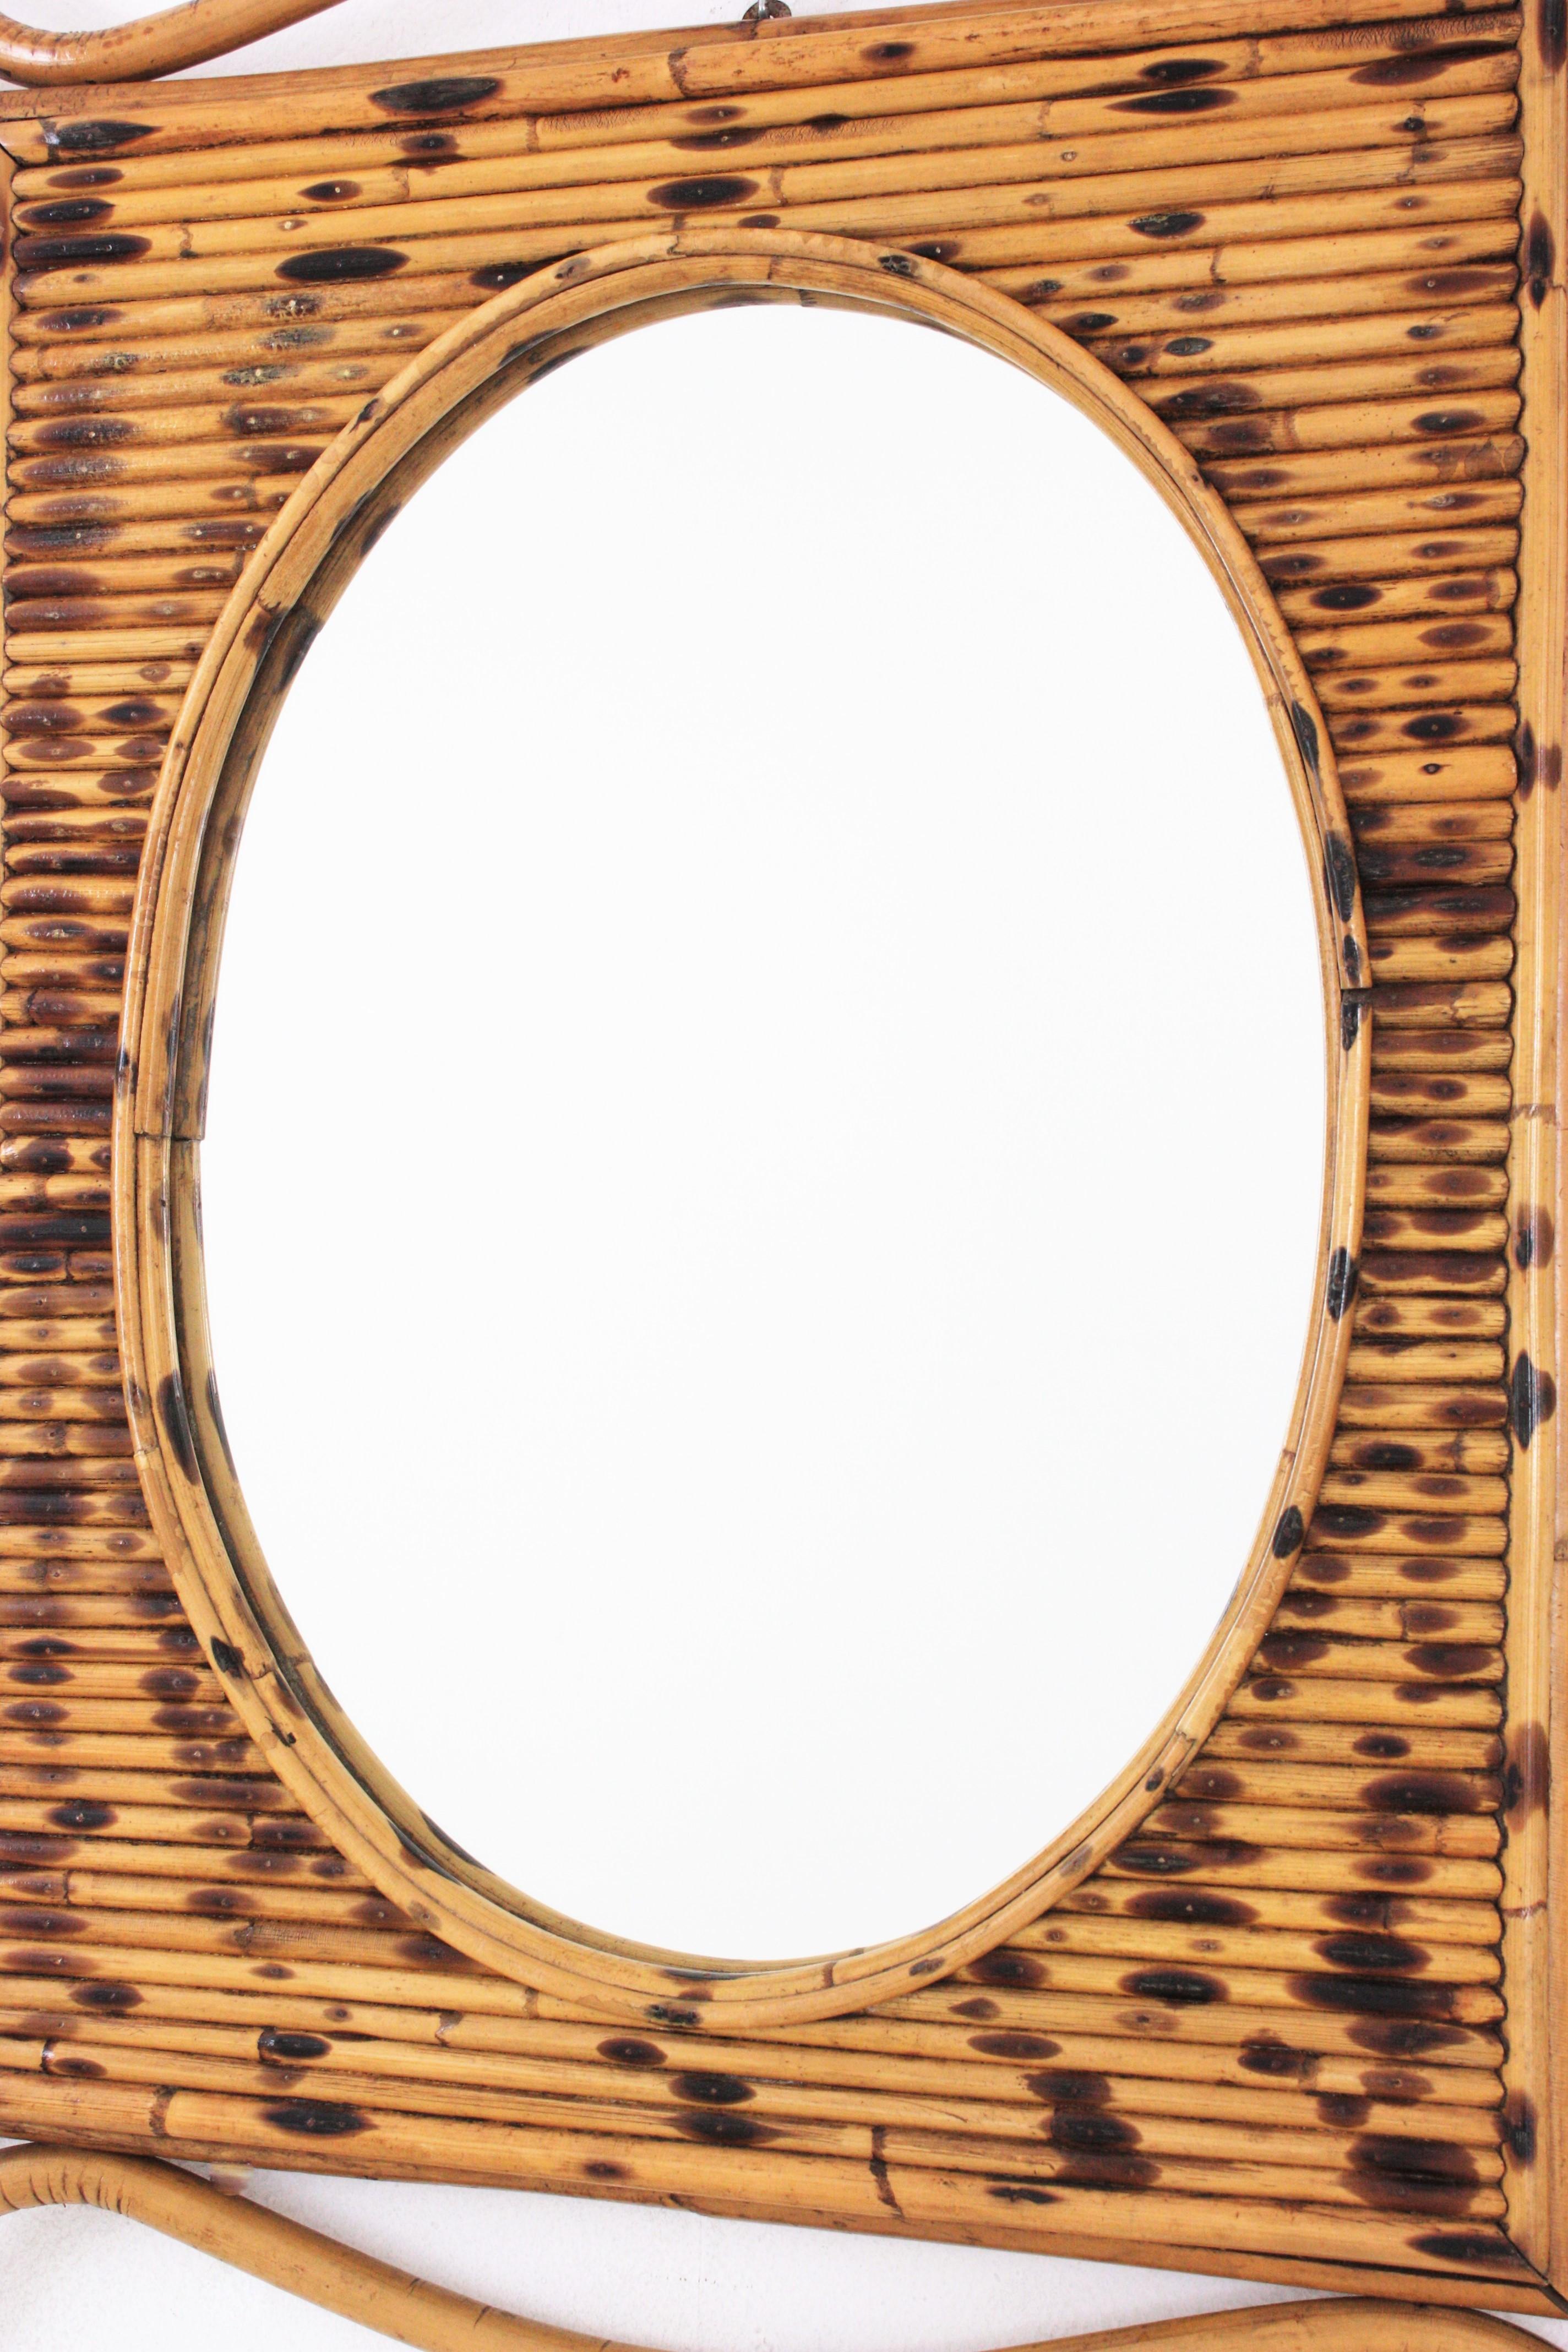 20th Century Rattan Bamboo Large Mirror with Split Reed Details, Spain, 1960s0s For Sale